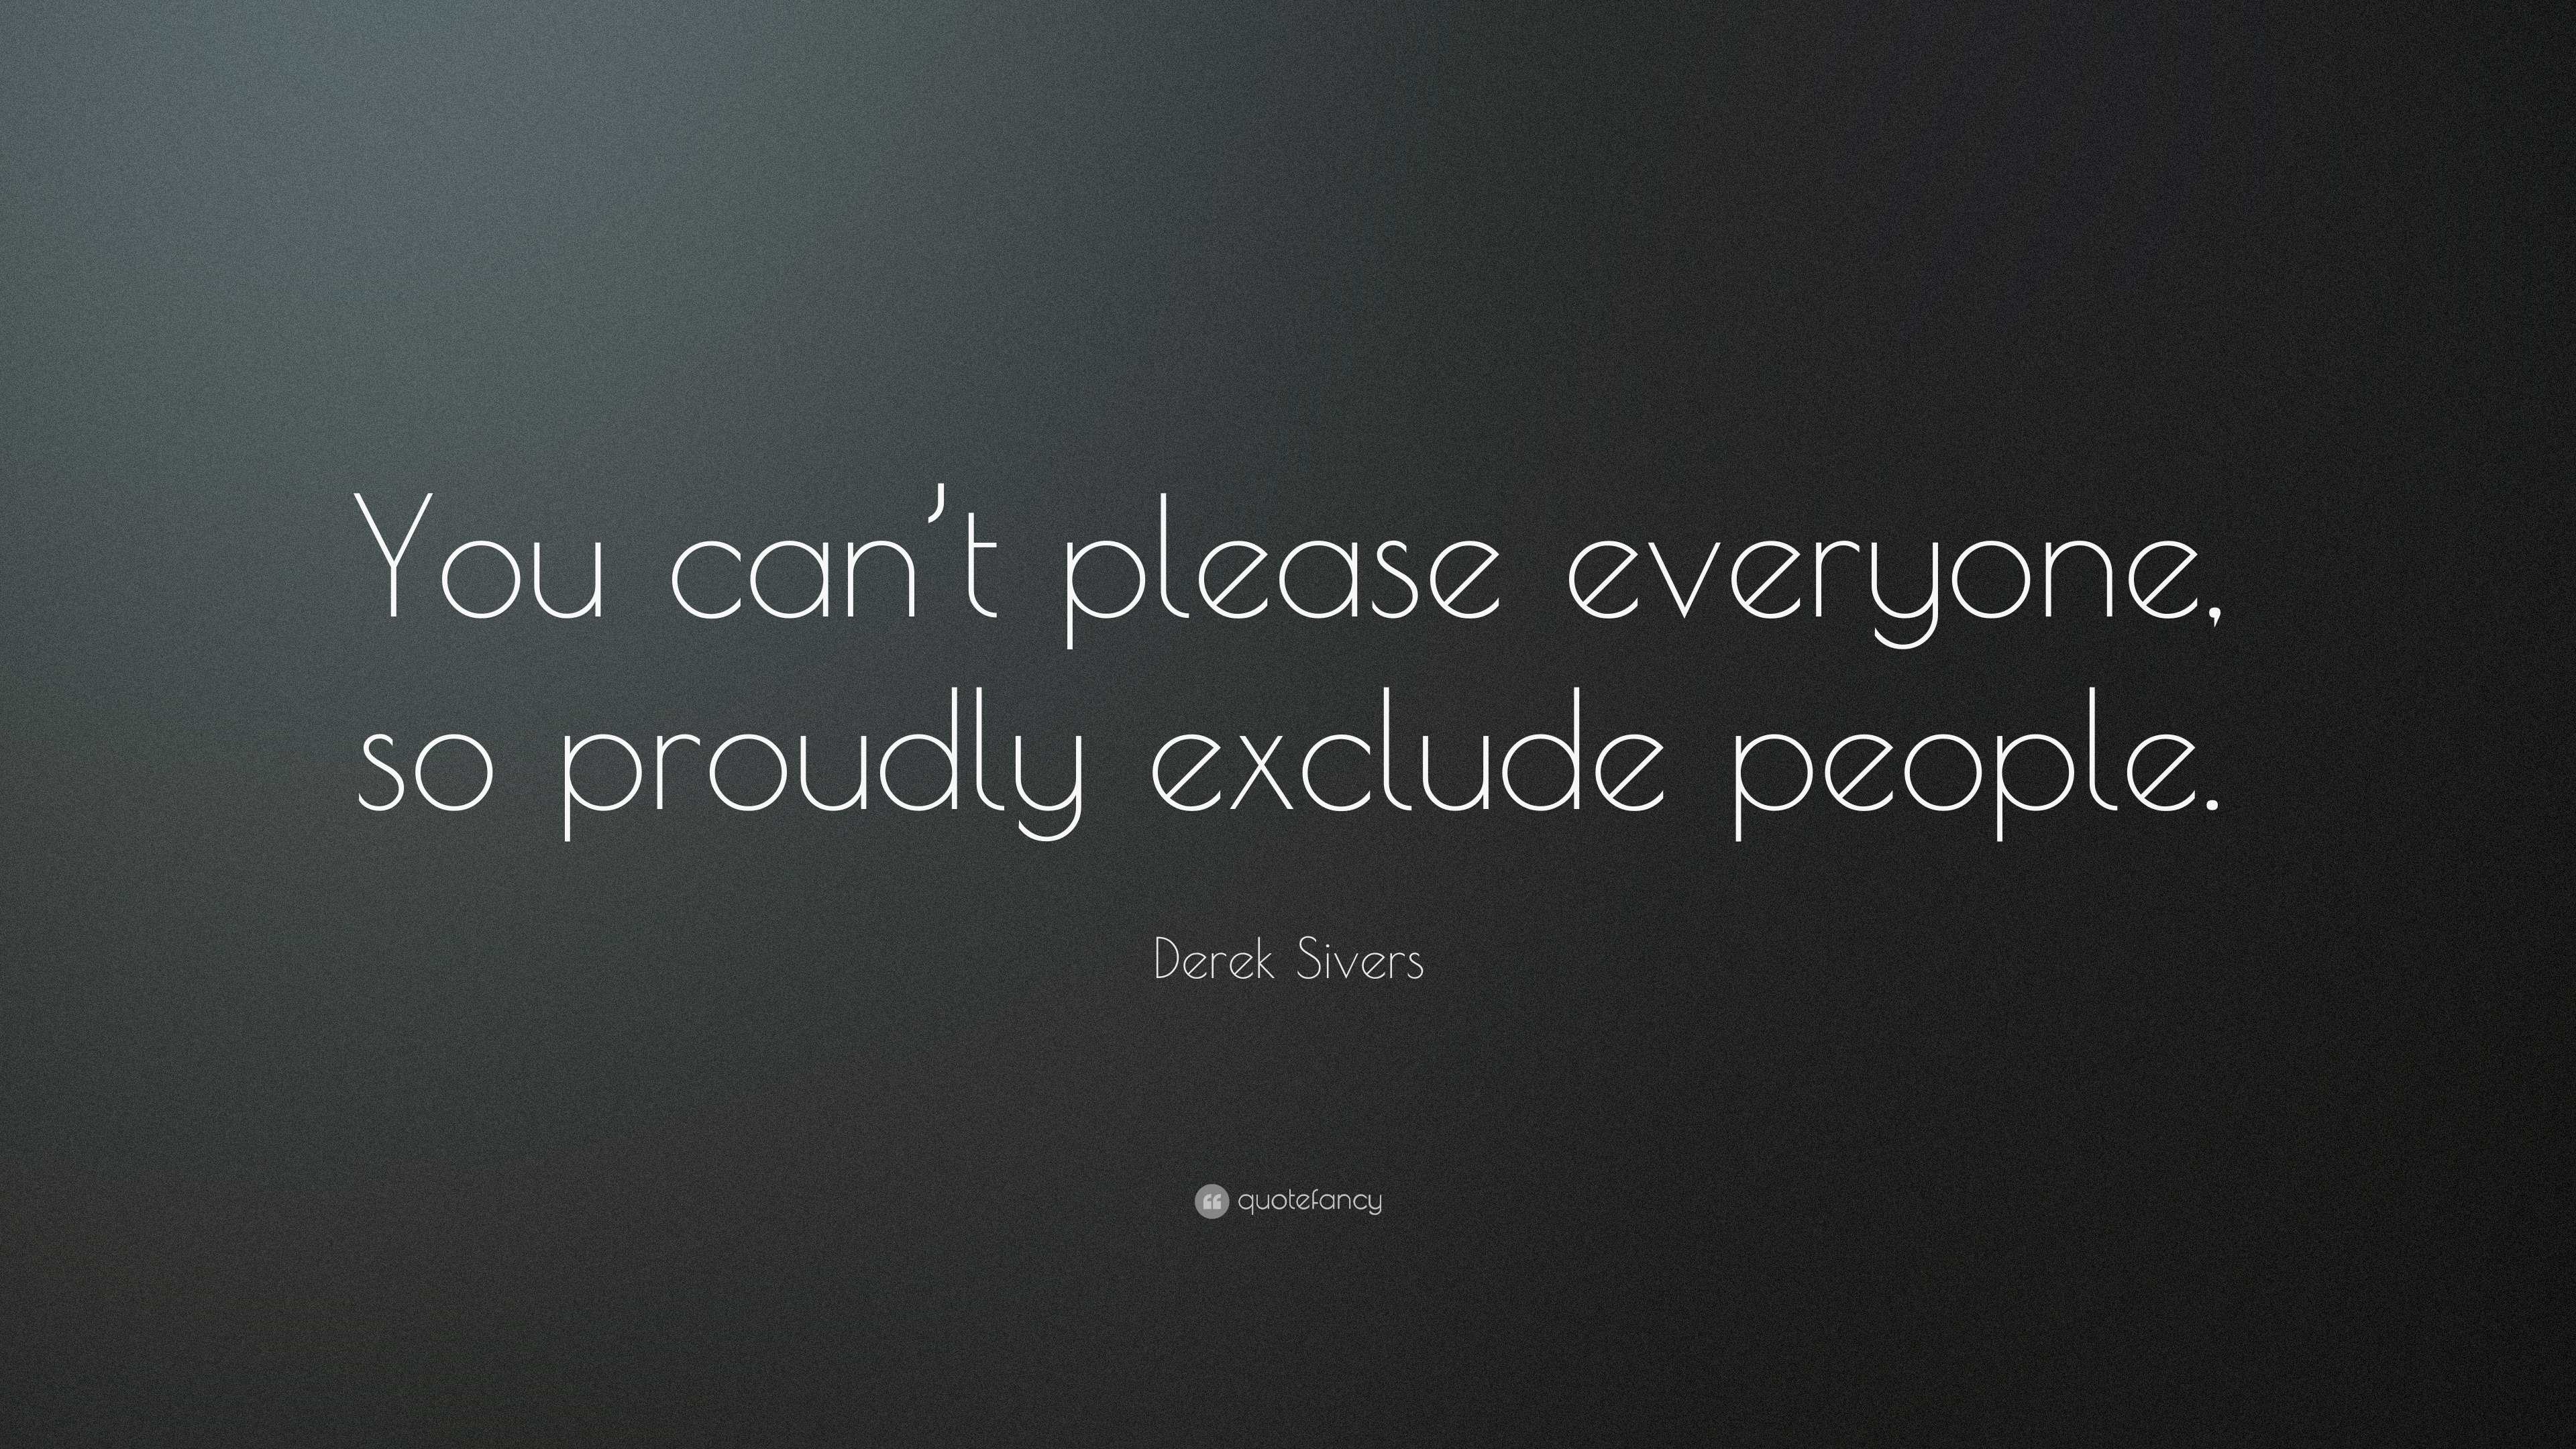 Derek Sivers Quote: “You can't please everyone, so proudly exclude